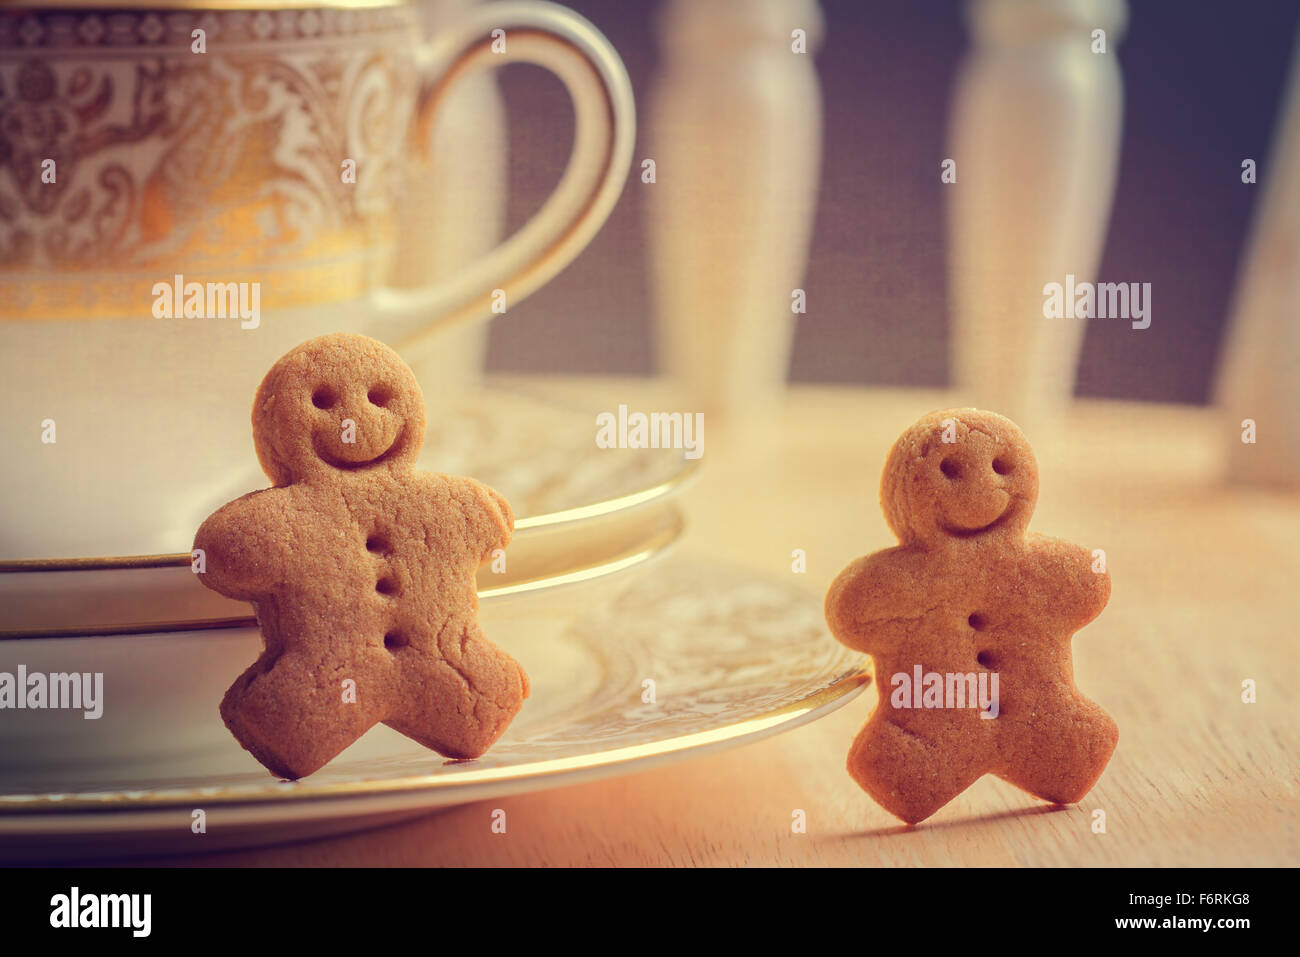 Happy gingerbread men sitting with antique teacups and saucers Stock Photo